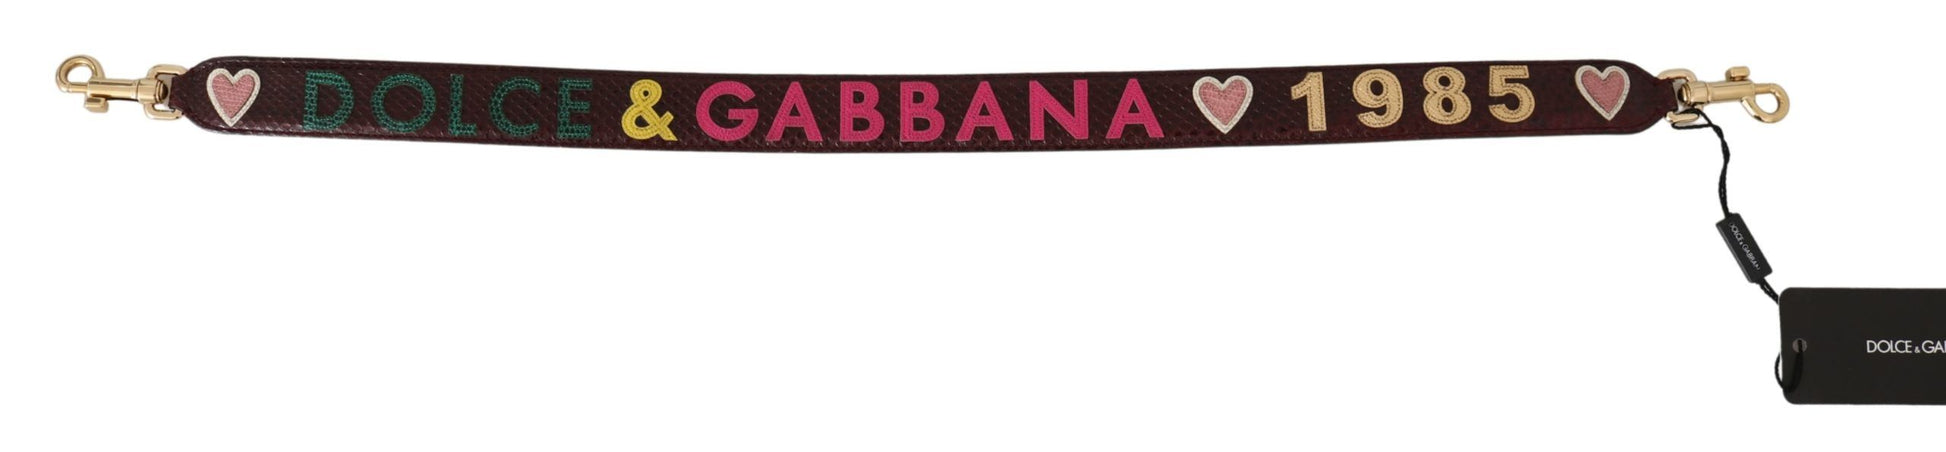 Bordeaux Exotic Skin Leather Belt Shoulder Strap - Designed by Dolce & Gabbana Available to Buy at a Discounted Price on Moon Behind The Hill Online Designer Discount Store